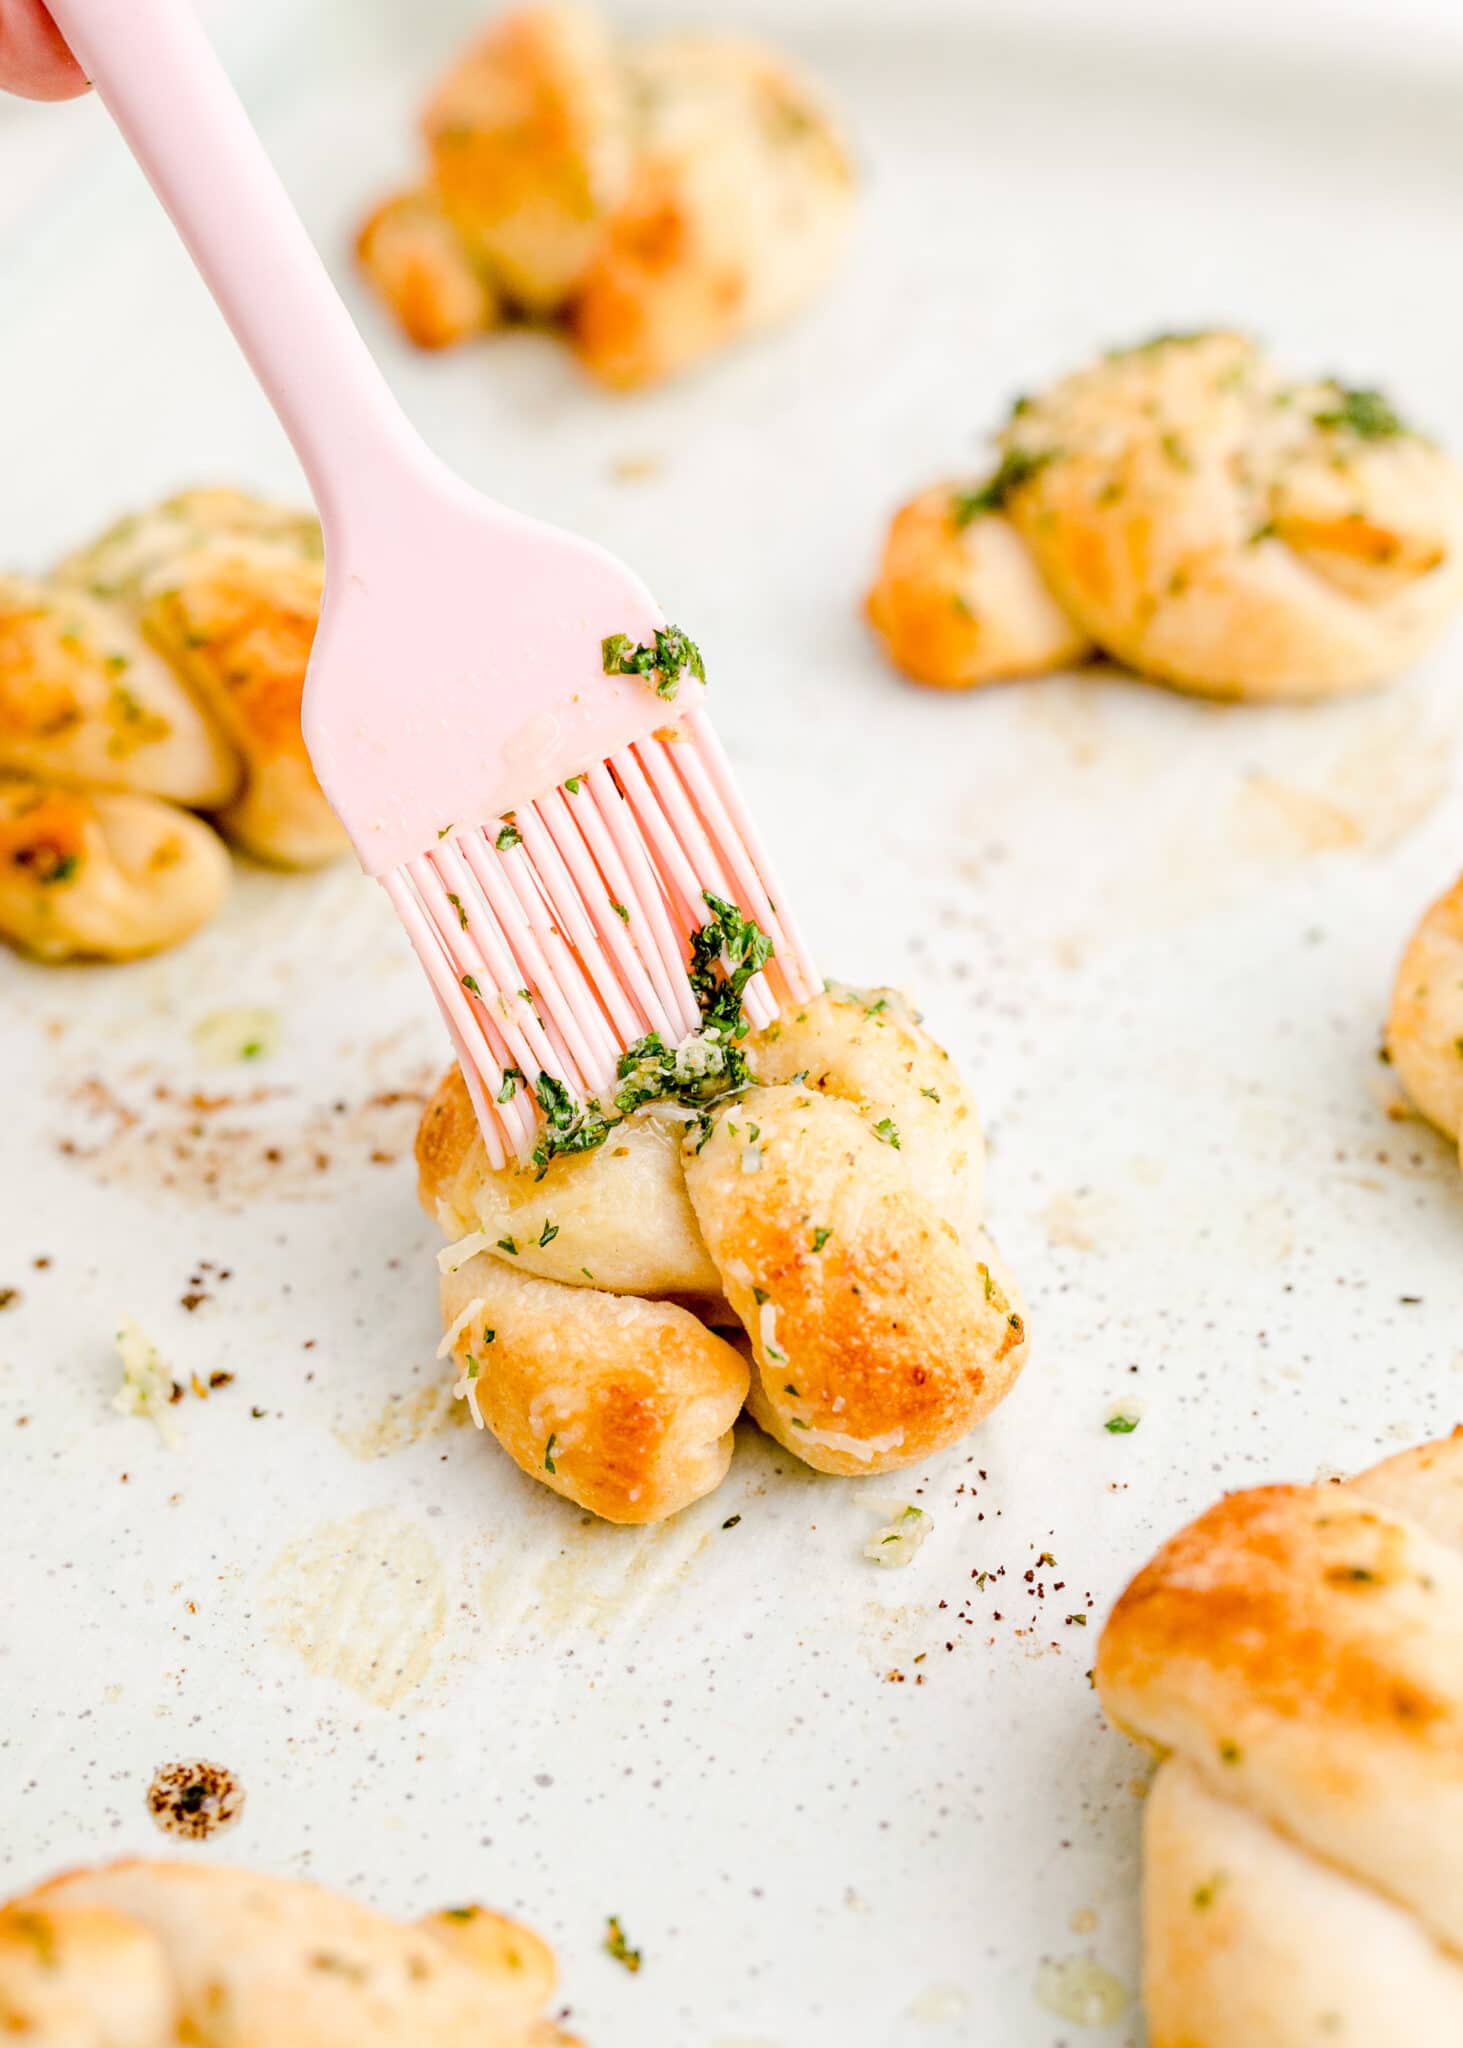 The tops of the pizza dough knots are brushed with garlic butter.